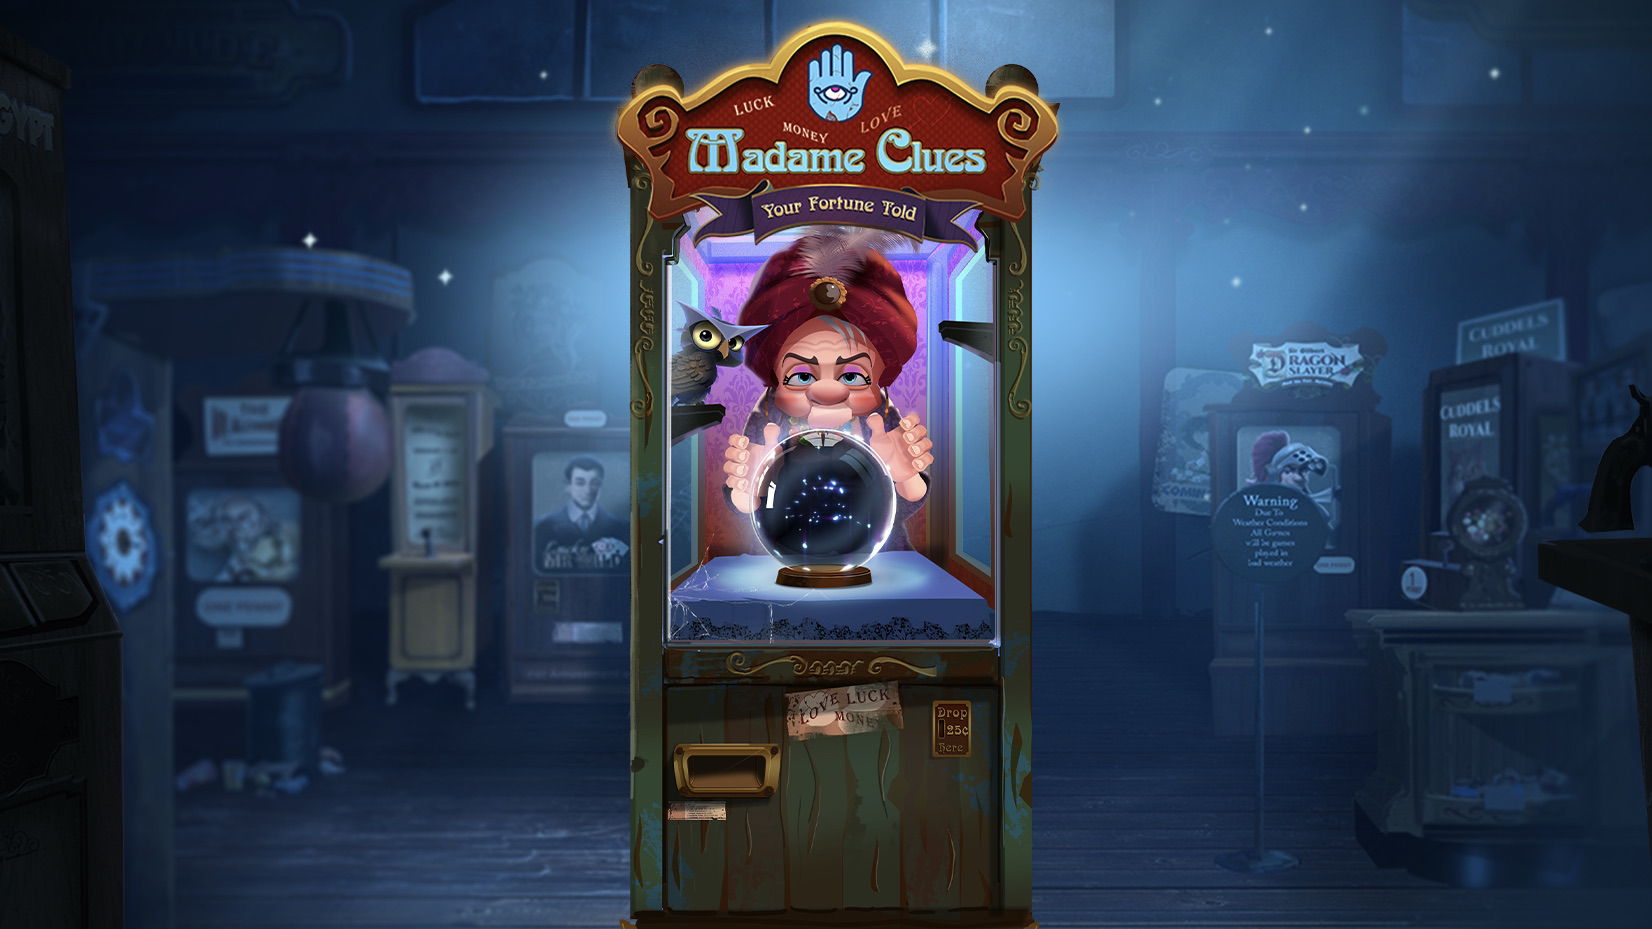 Madame Clues is a single-reel video slot that incorporates a maximum win potential of up to x23,040 the bet.